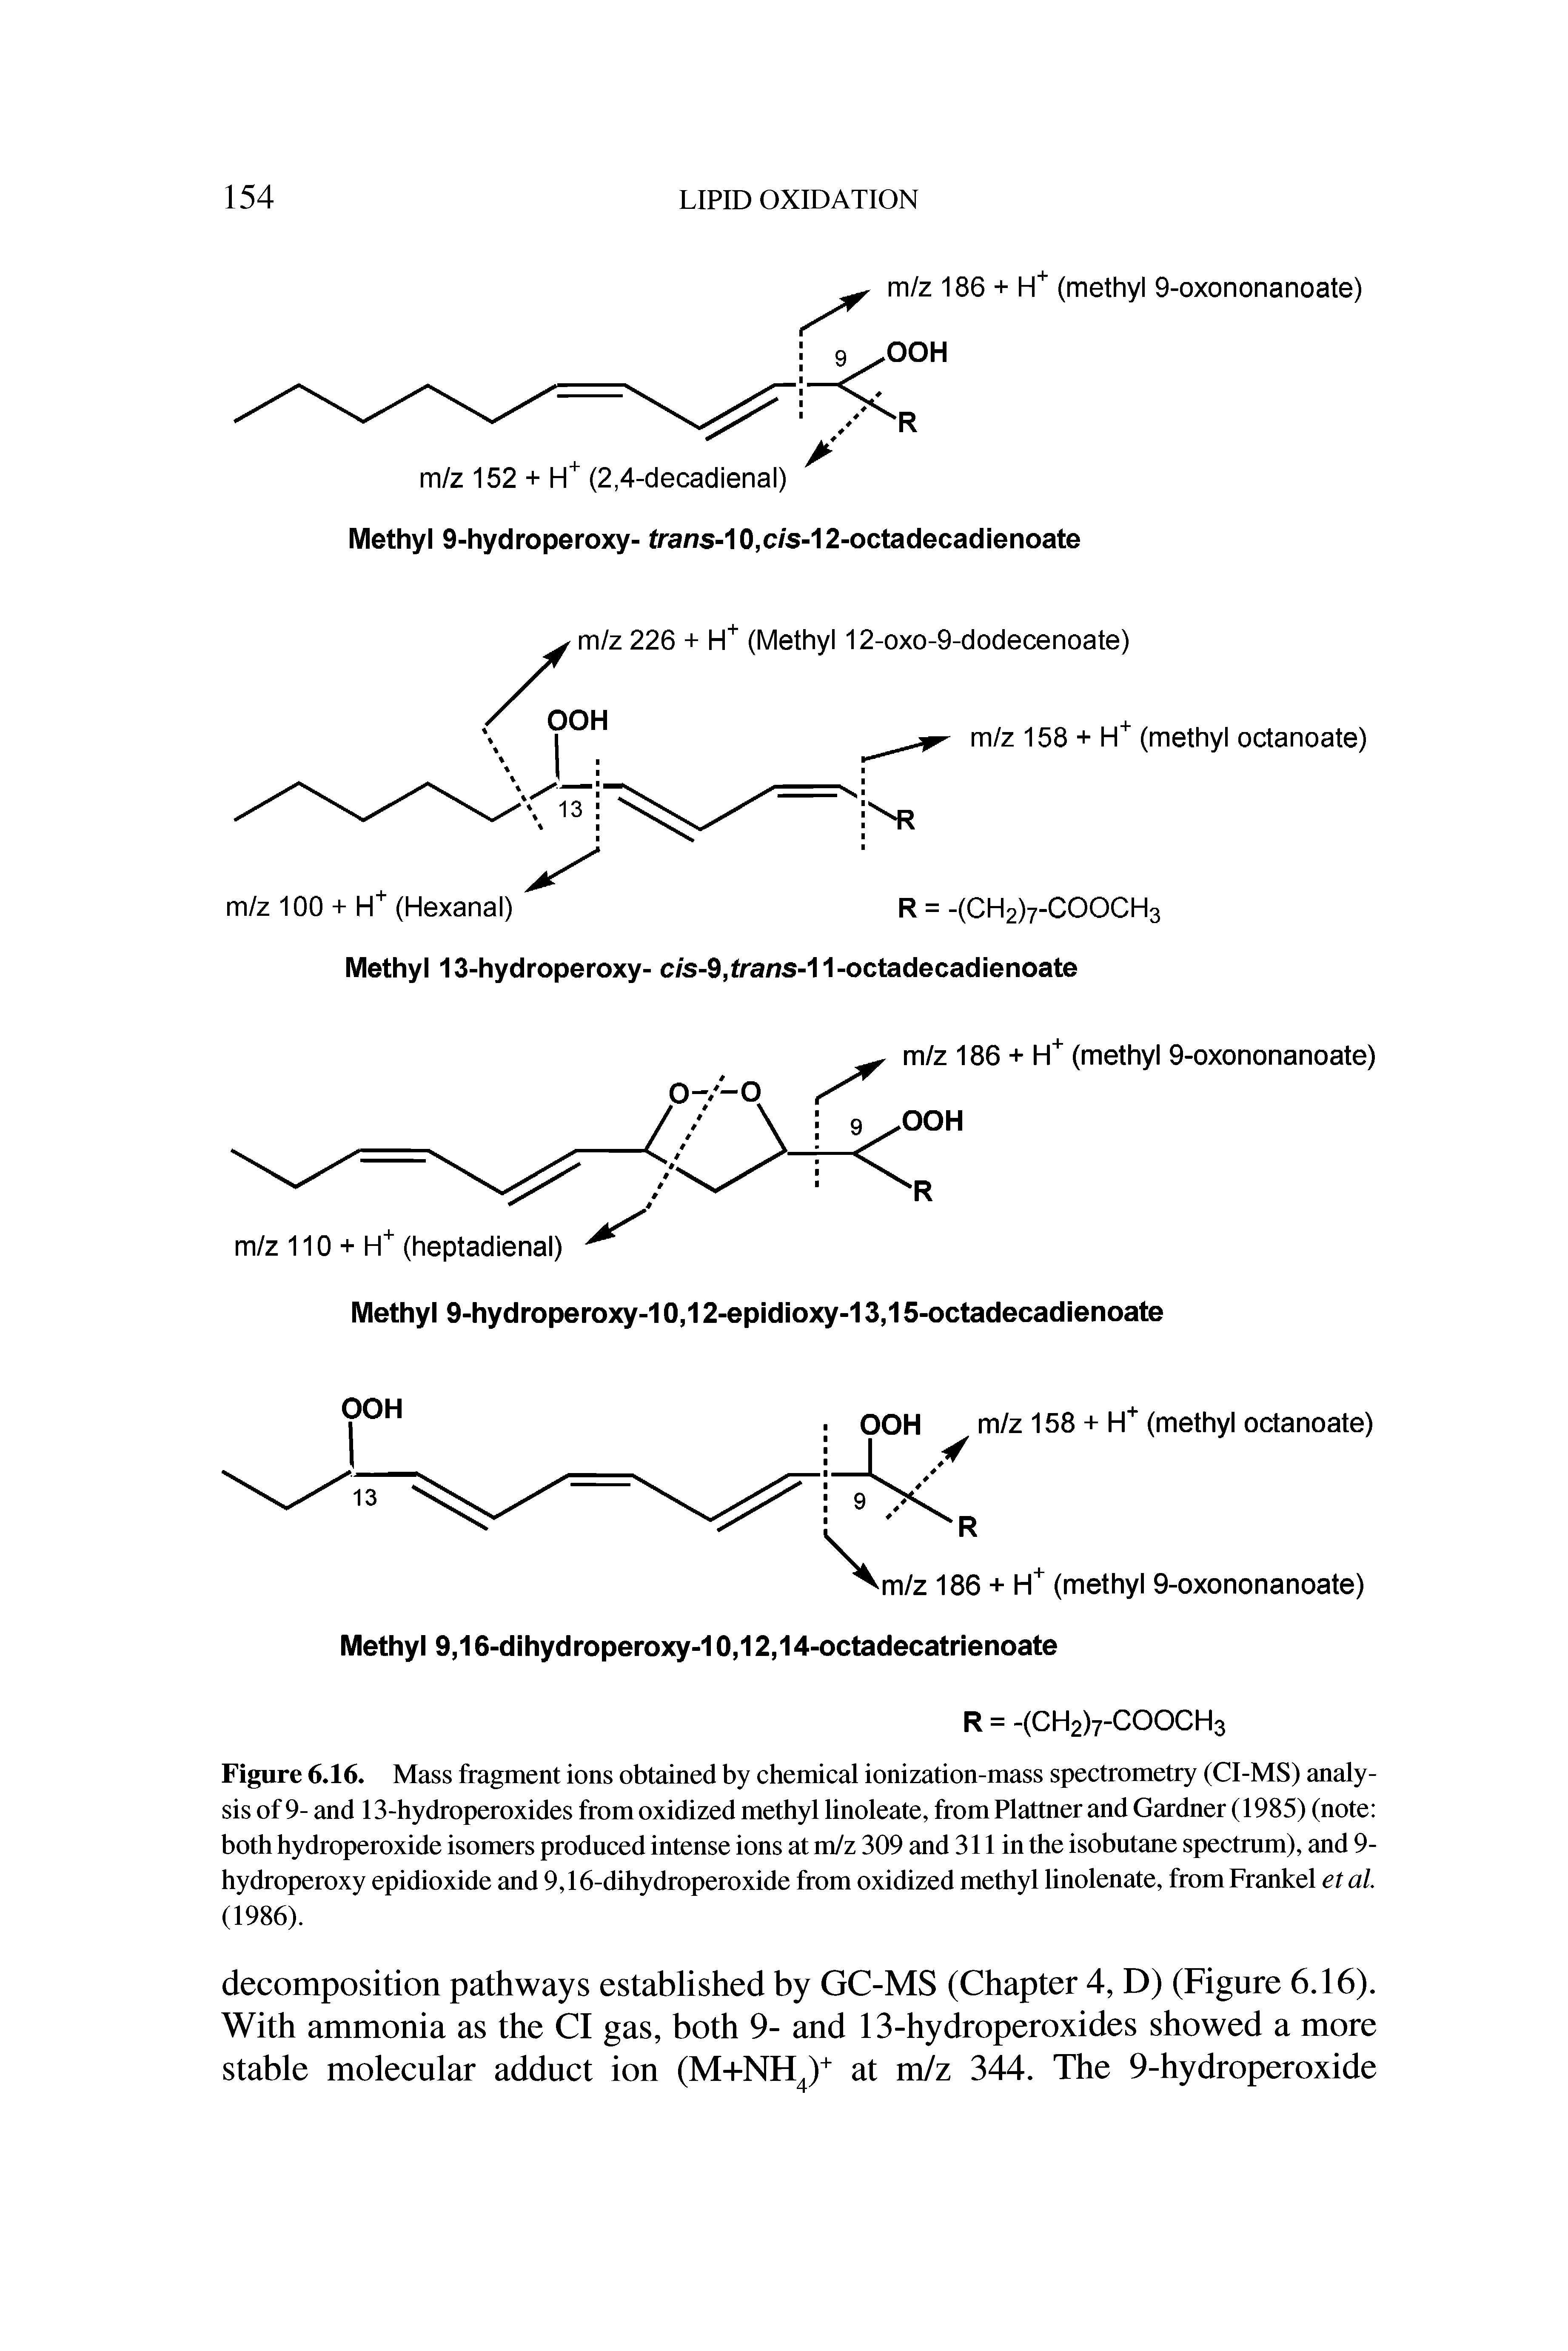 Figure 6.16. Mass fragment ions obtained by chemical ionization-mass spectrometry (CI-MS) analysis of 9- and 13-hydroperoxides from oxidized methyl linoleate, from Plattner and Gardner (1985) (note both hydroperoxide isomers produced intense ions at m/z 309 and 311 in the isobutane spectrum), and 9-hydroperoxy epidioxide and 9,16-dihydroperoxide from oxidized methyl linolenate, fromFrankel etal (1986).